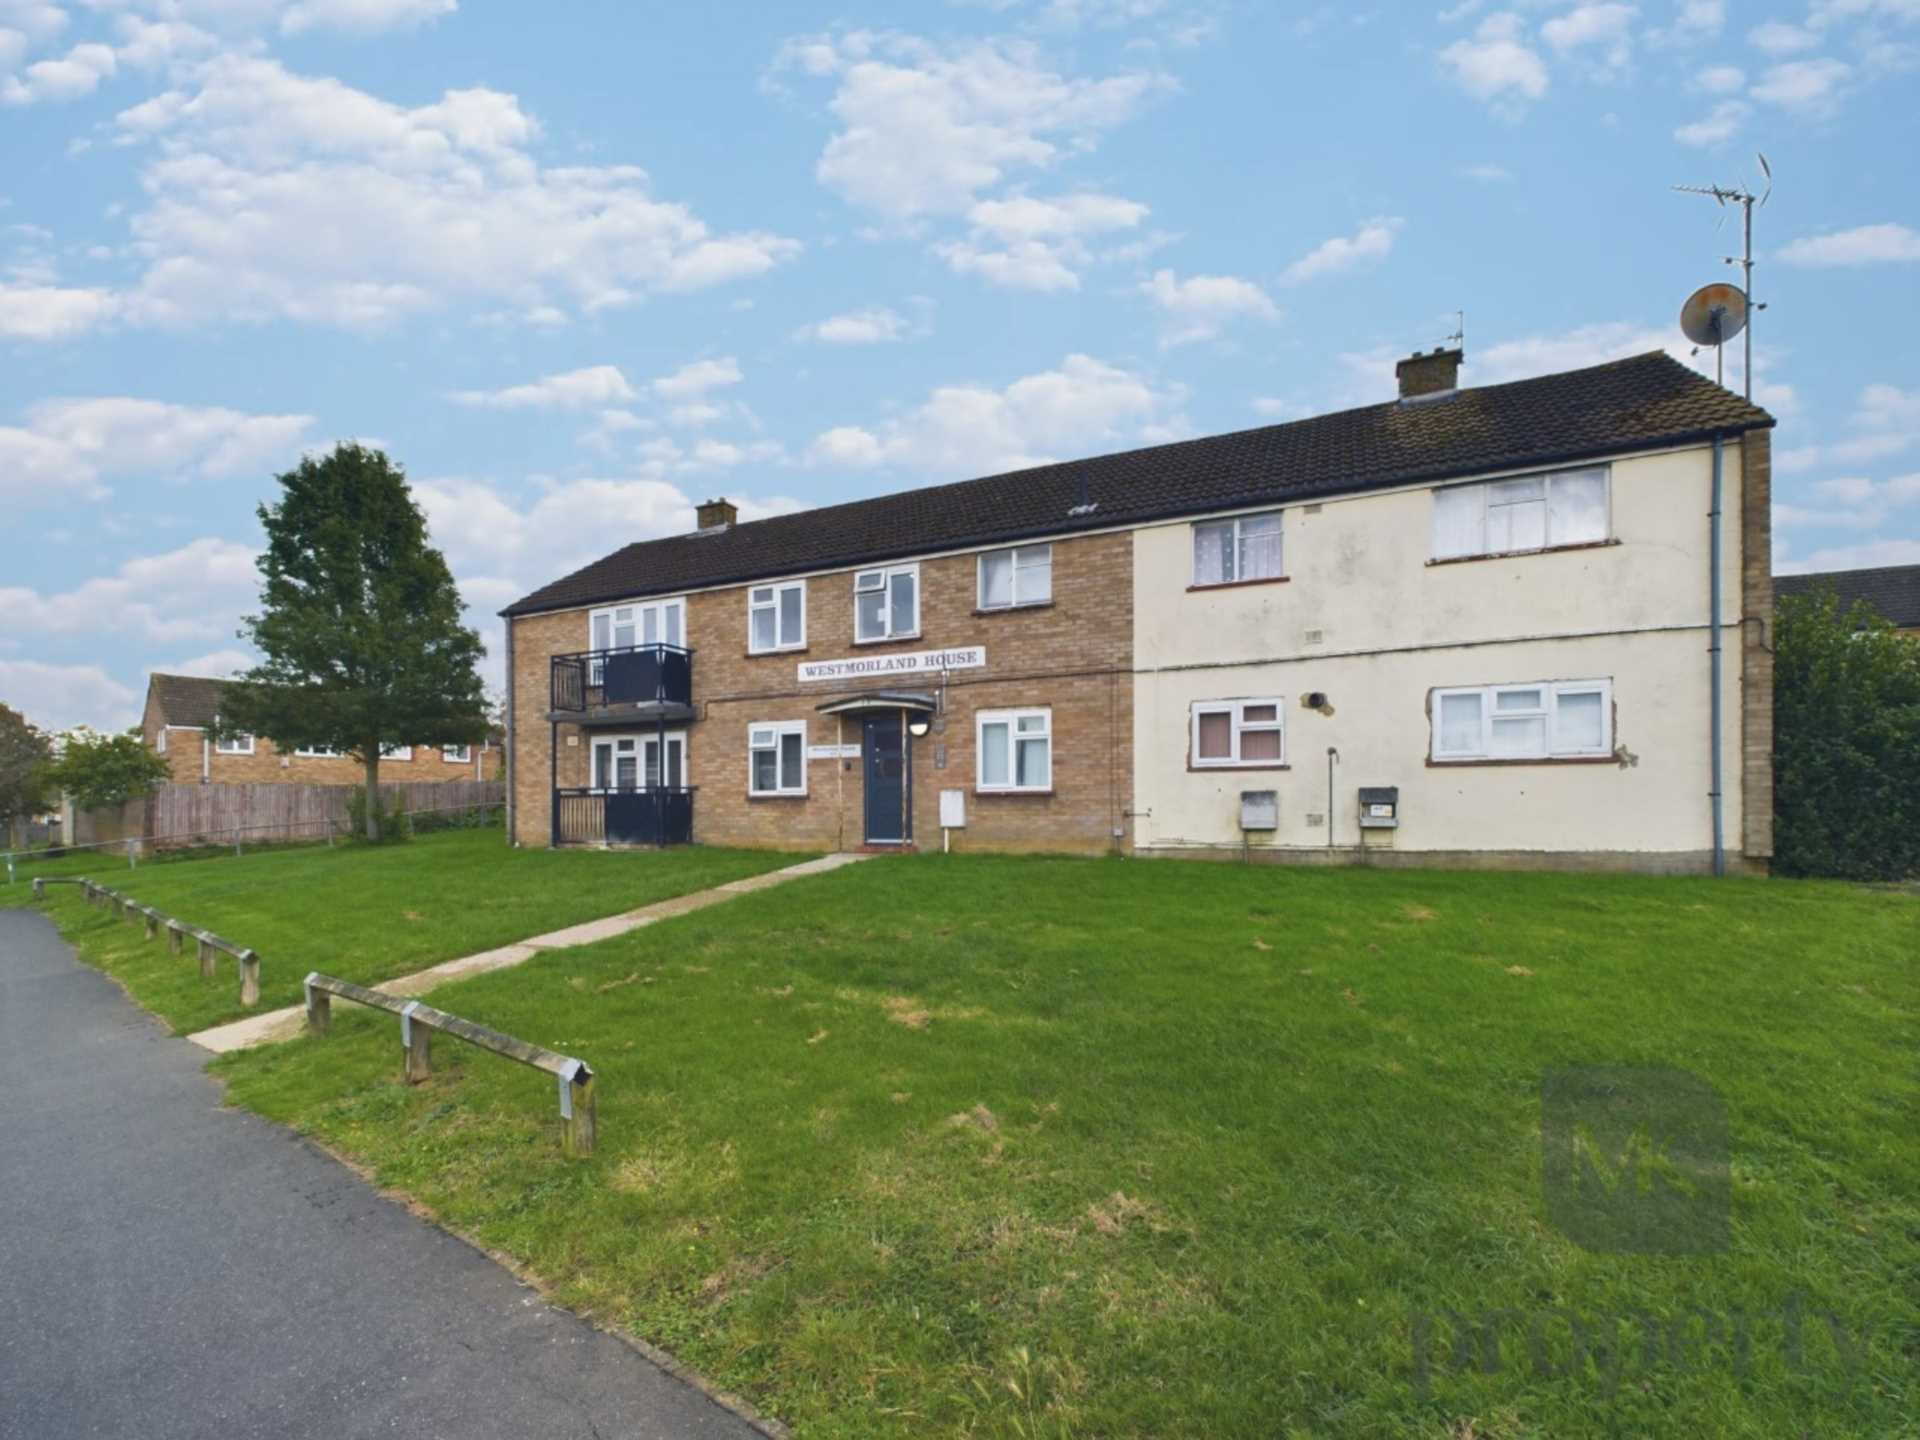 Forfar Drive, Bletchley, Image 1